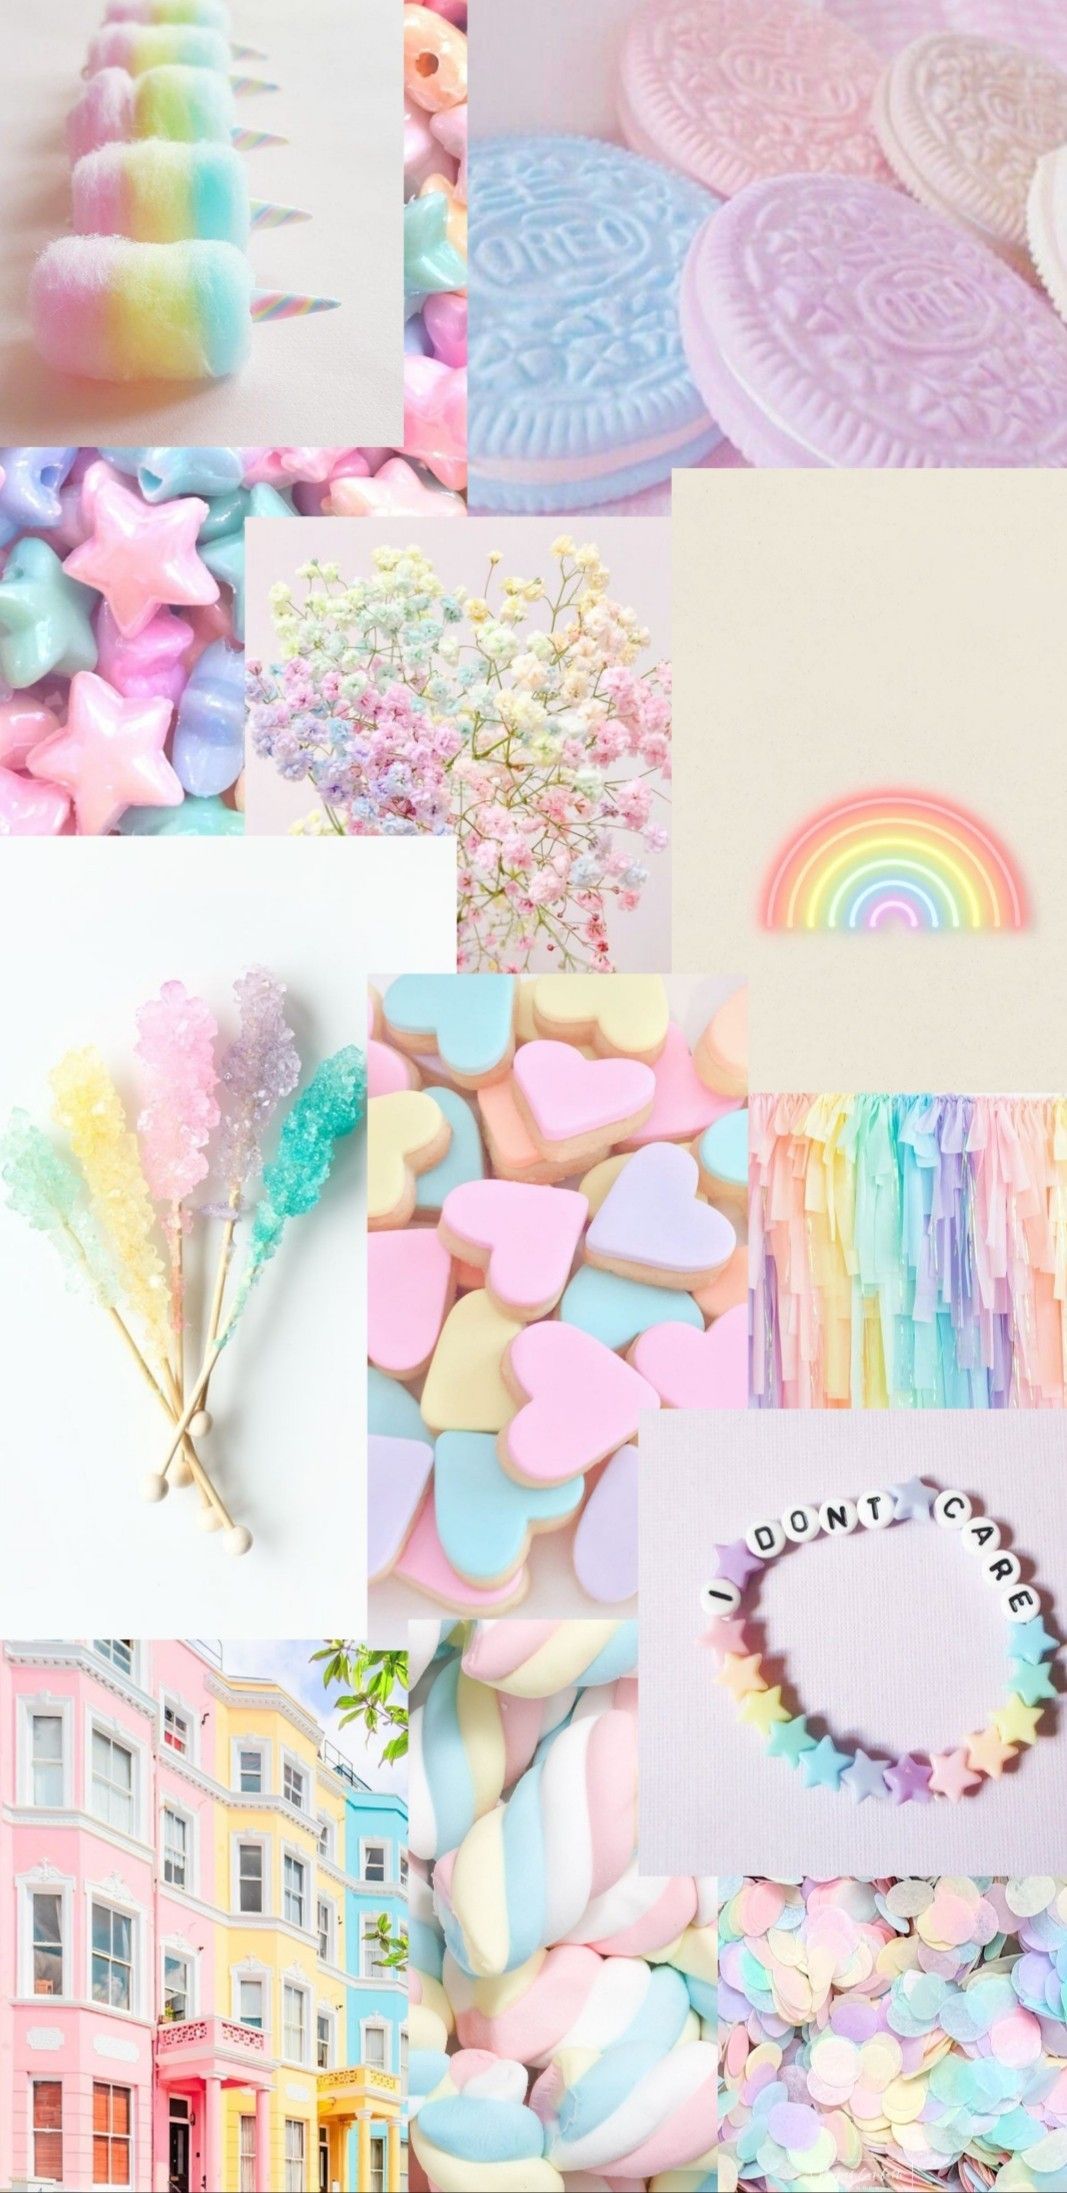 A collage of pictures with different colors - Colorful, pastel rainbow